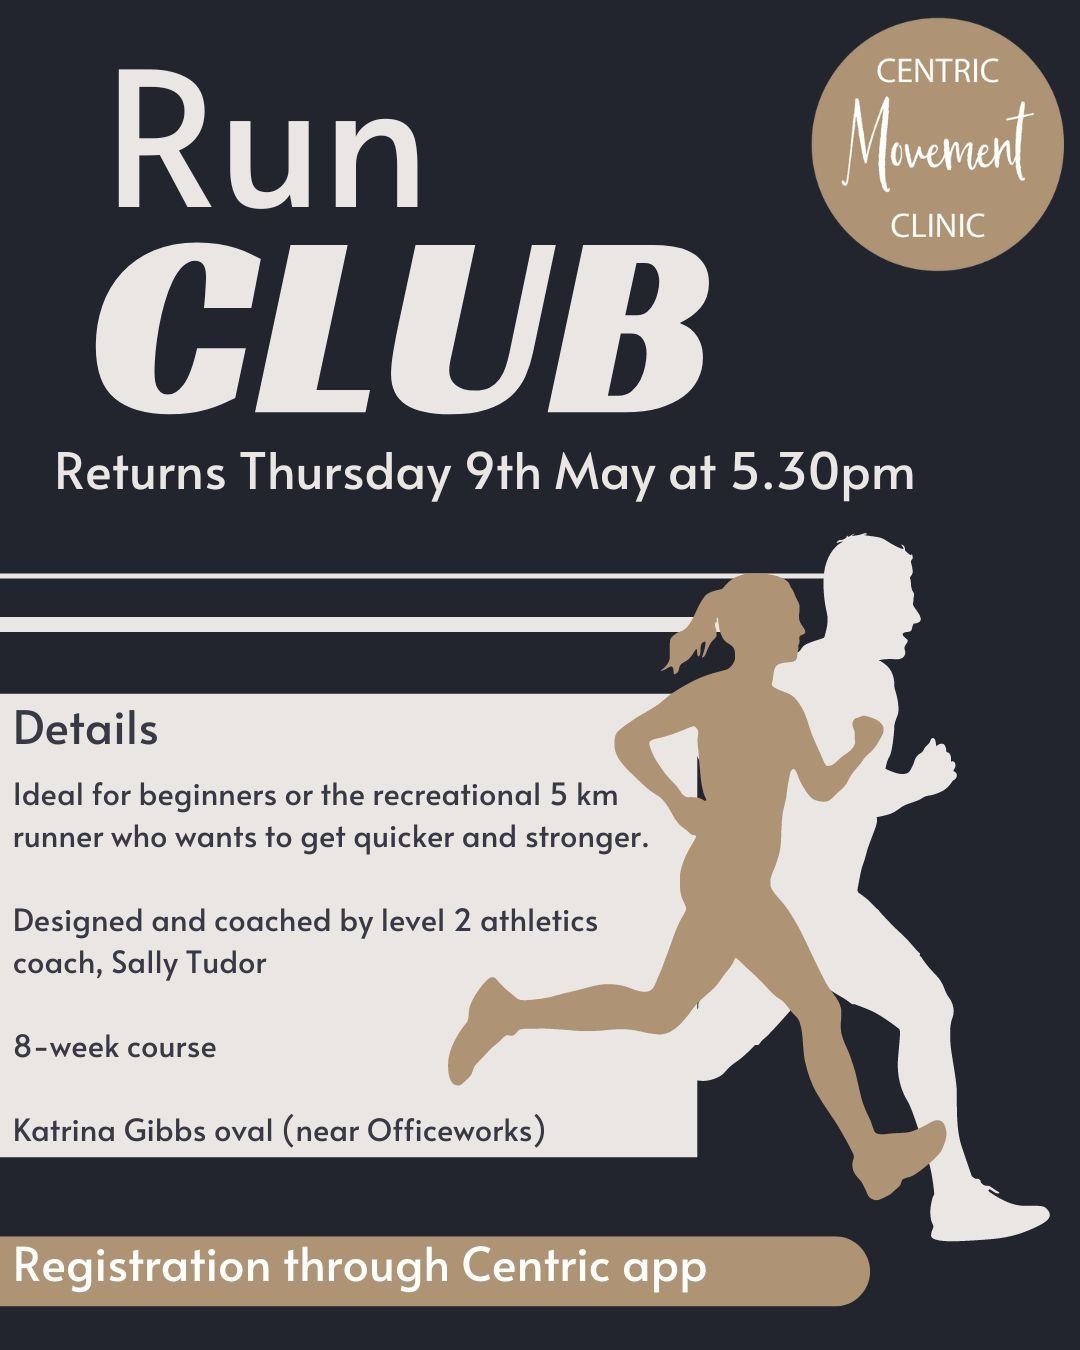 Run Club is Back!

Registrations can be made through the Centric Movement Clinic App (Not the Mindbody app). Spaces are limited so make sure you get in a book your spot.

Any questions send us an email on info@centricmovement.co or call on 6882 0507